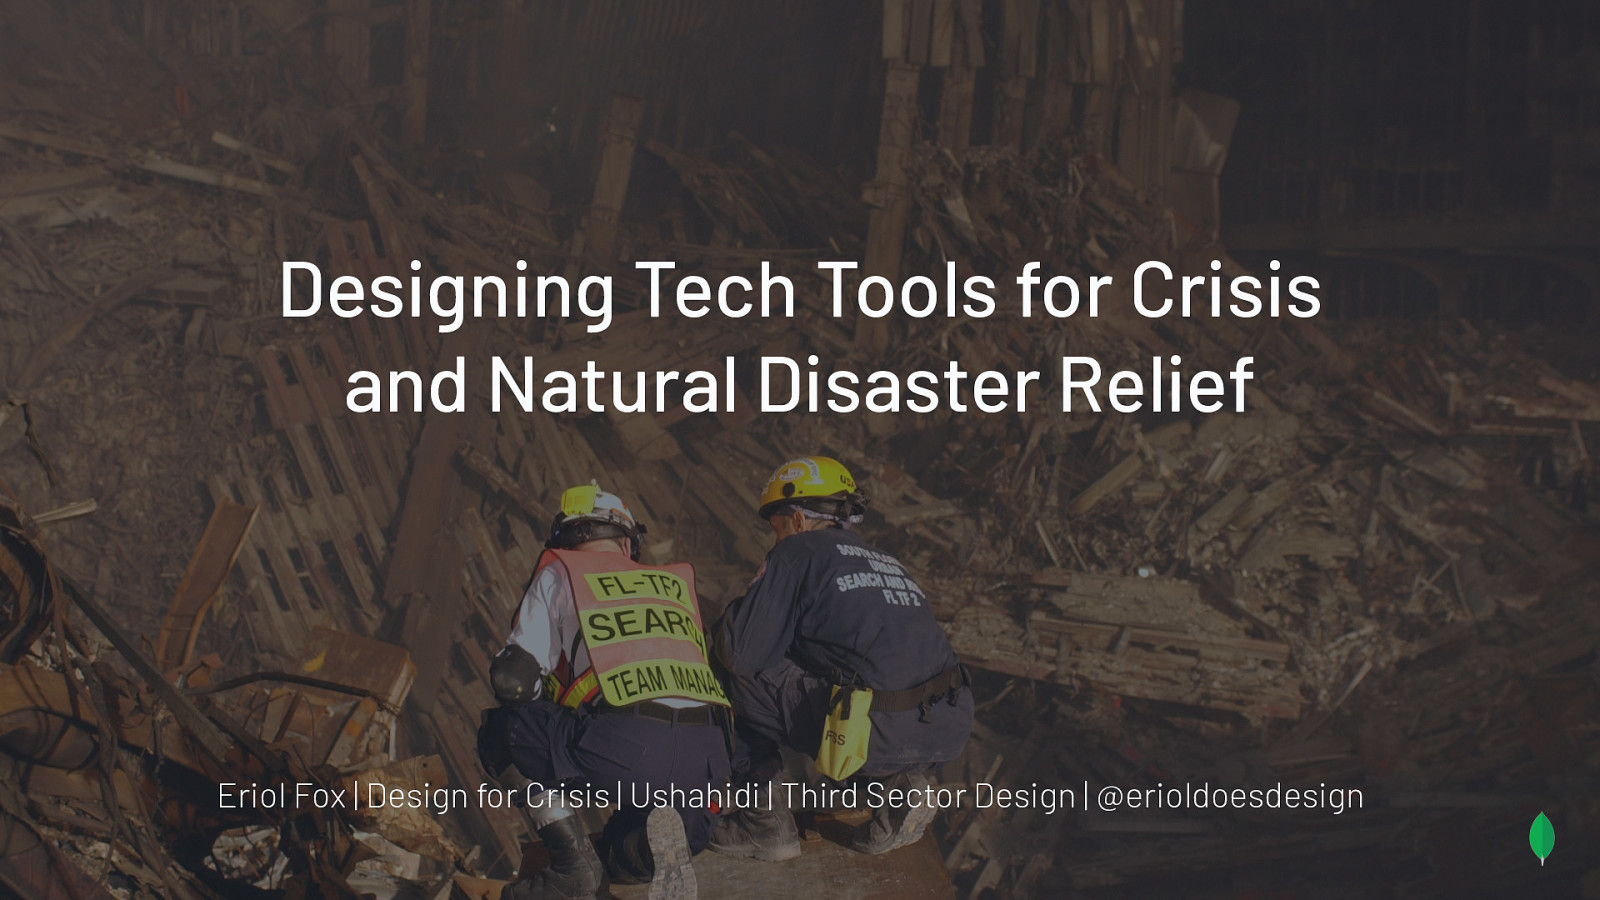 Designing Tech Tools for Crisis and Natural Disaster Relief